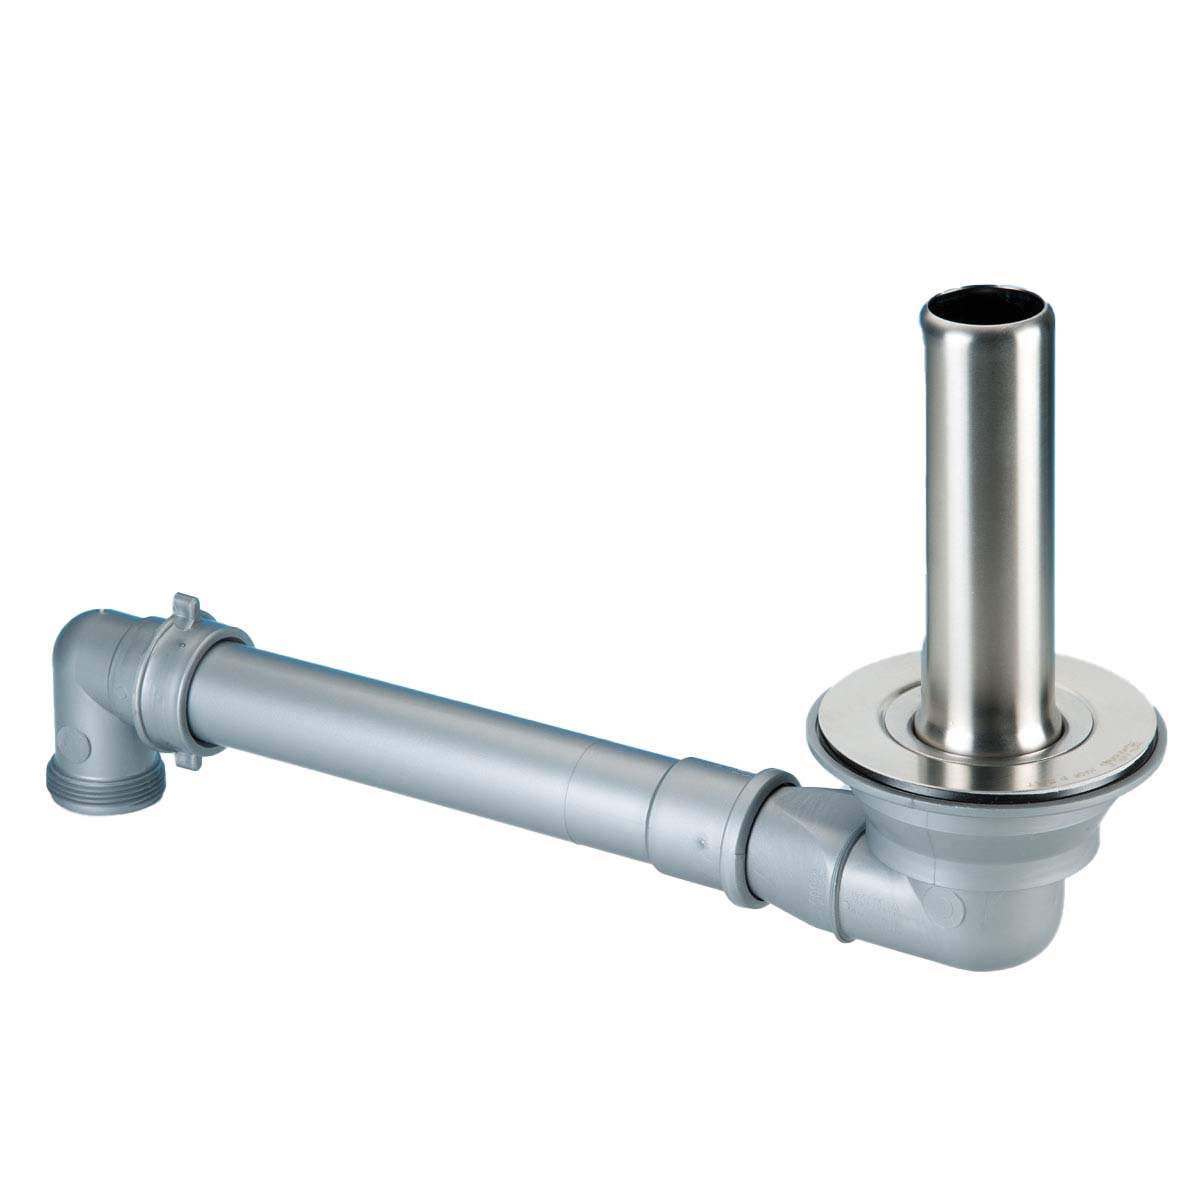 Space saving drain with 170mm stainless steel overflow tube for 90mm diameter sink